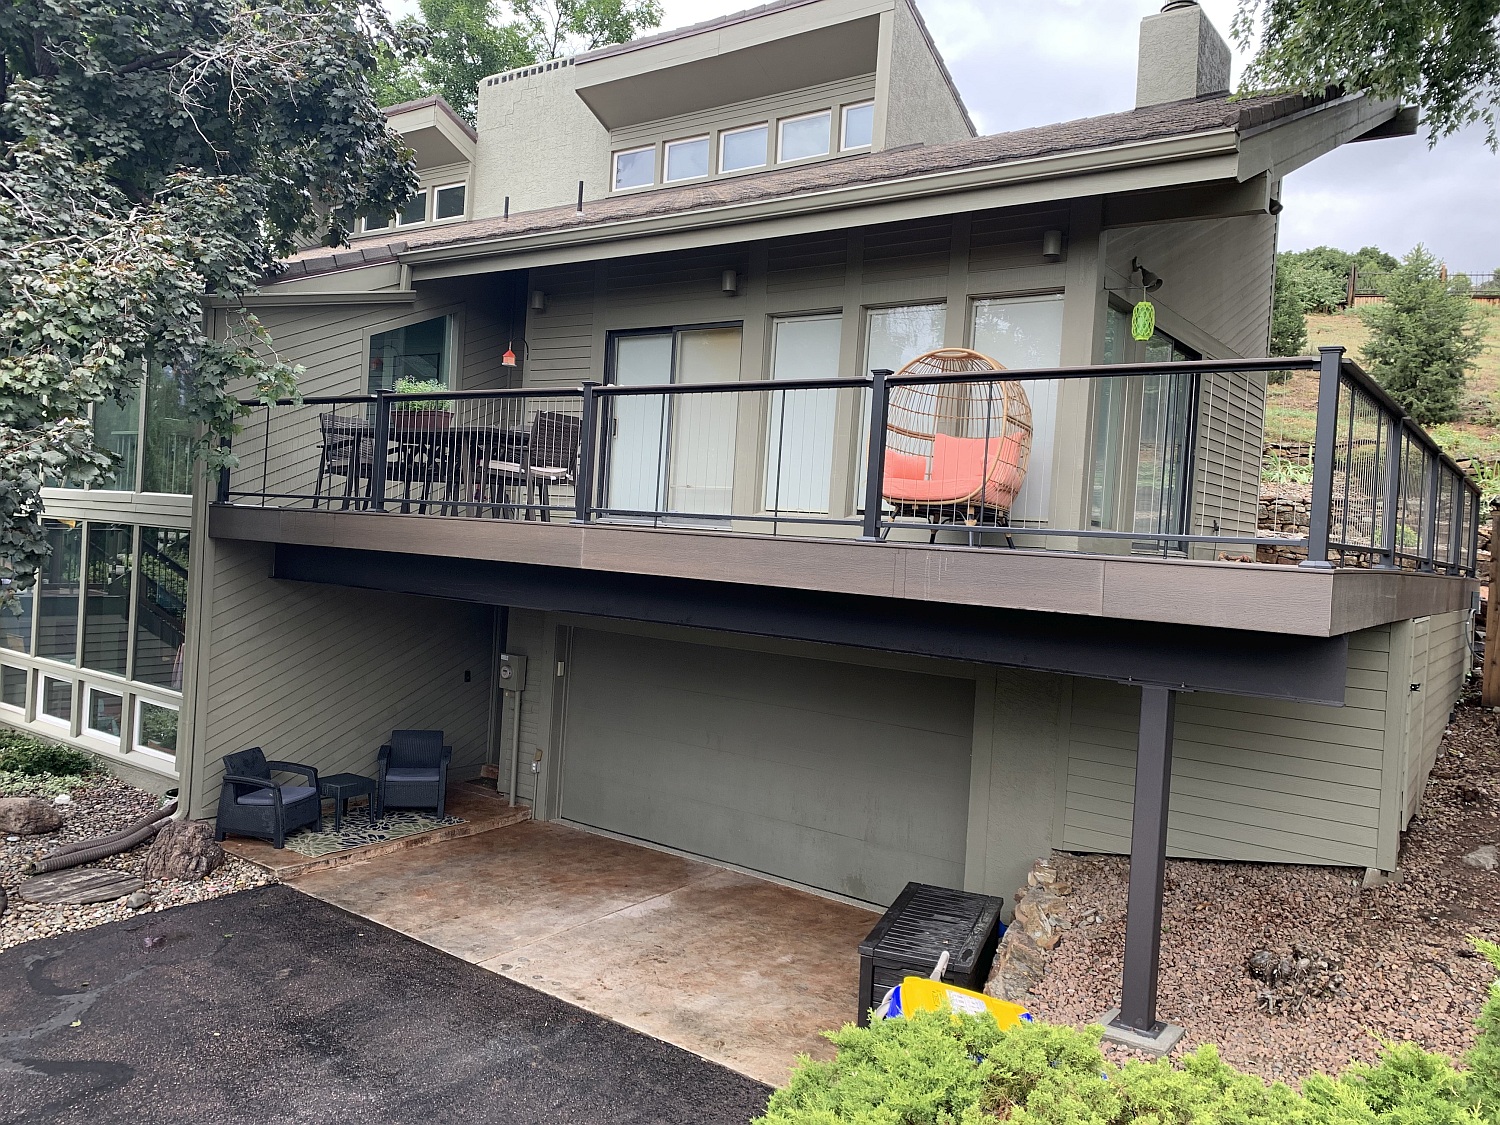 A new composite deck with a metal and cable railing creates a beautiful outdoor living space for the homeowners.